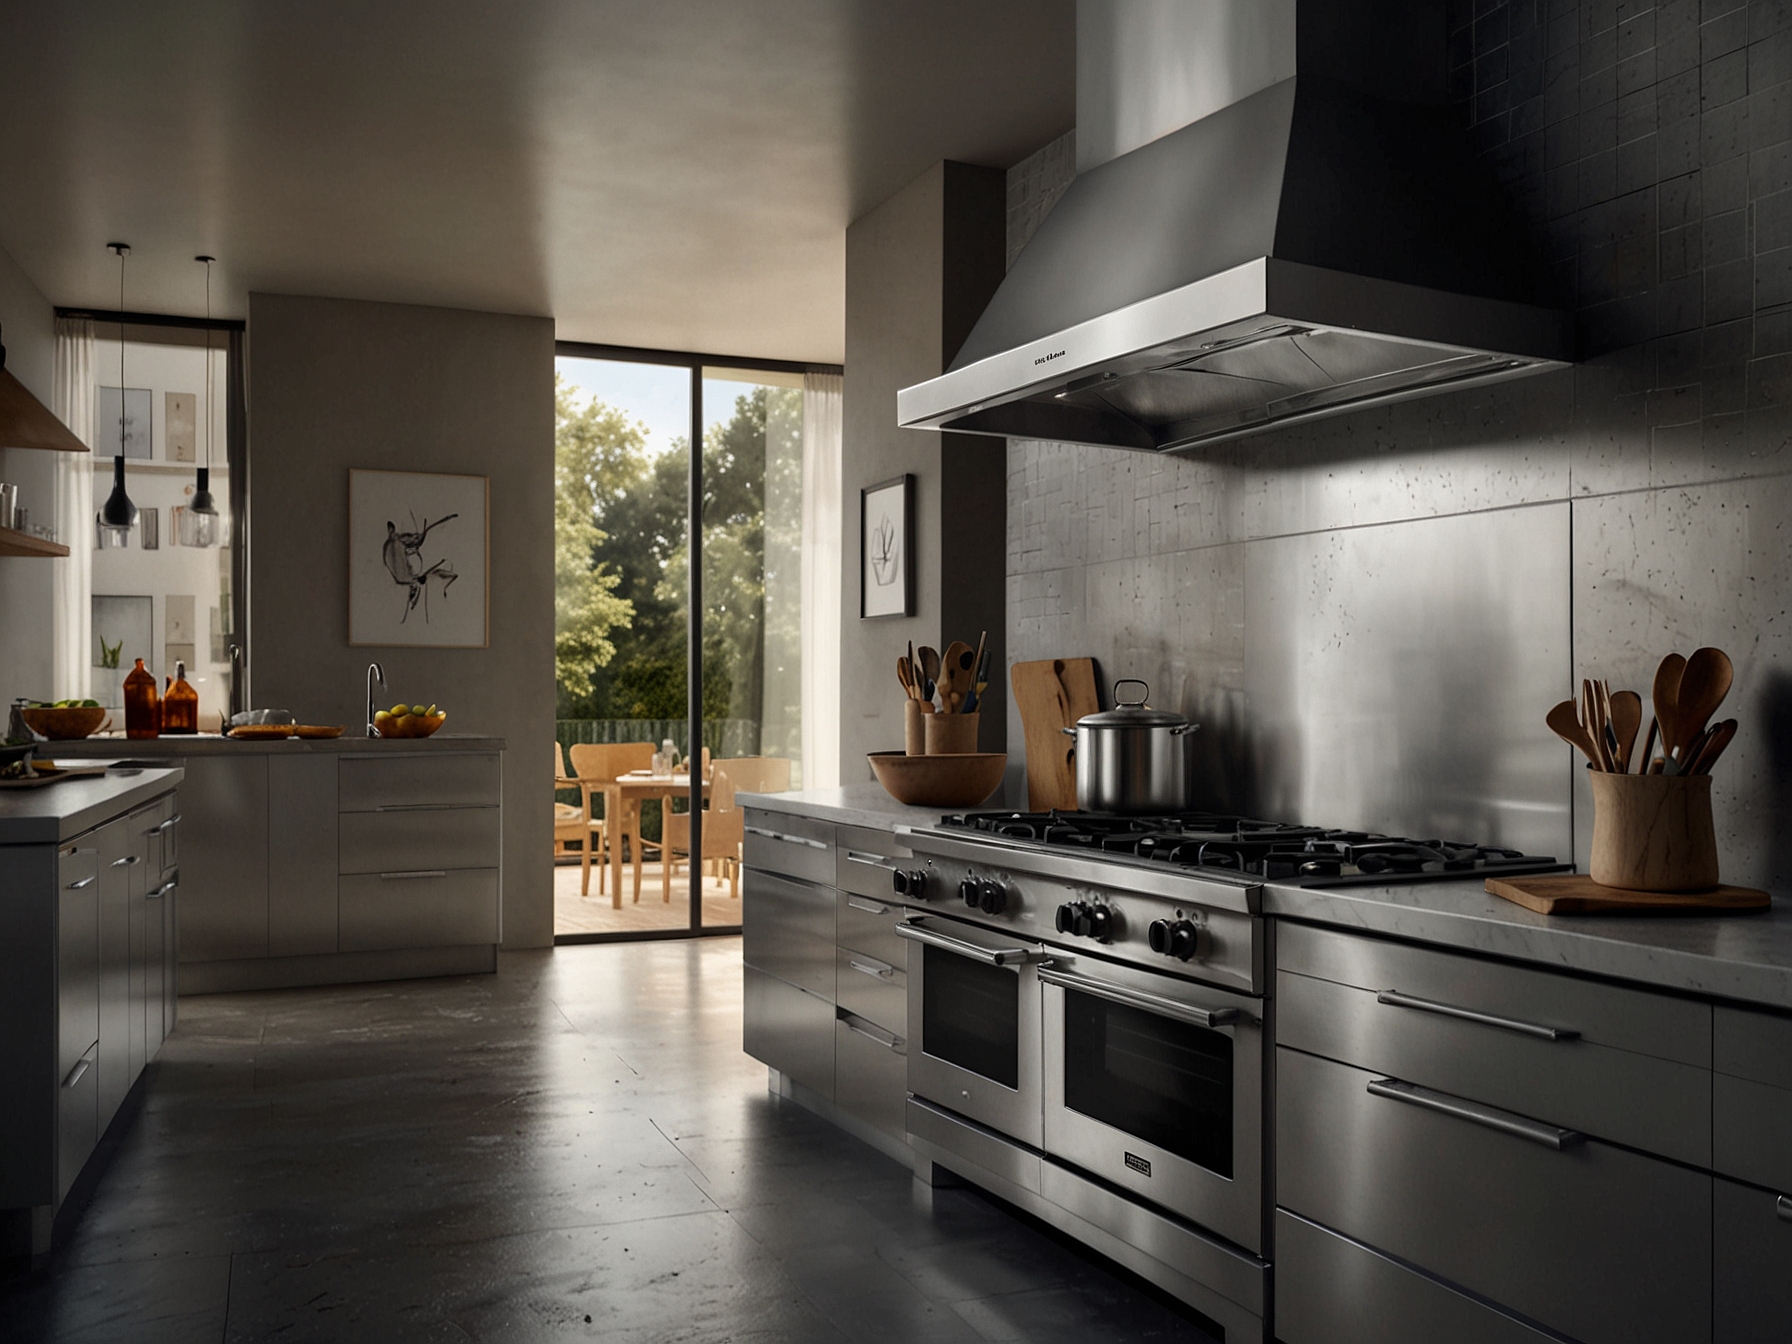 A modern kitchen showcasing a sleek stainless steel gas stove with multiple burners, highlighting its versatility, instant heat, and precise temperature control for various cooking styles.